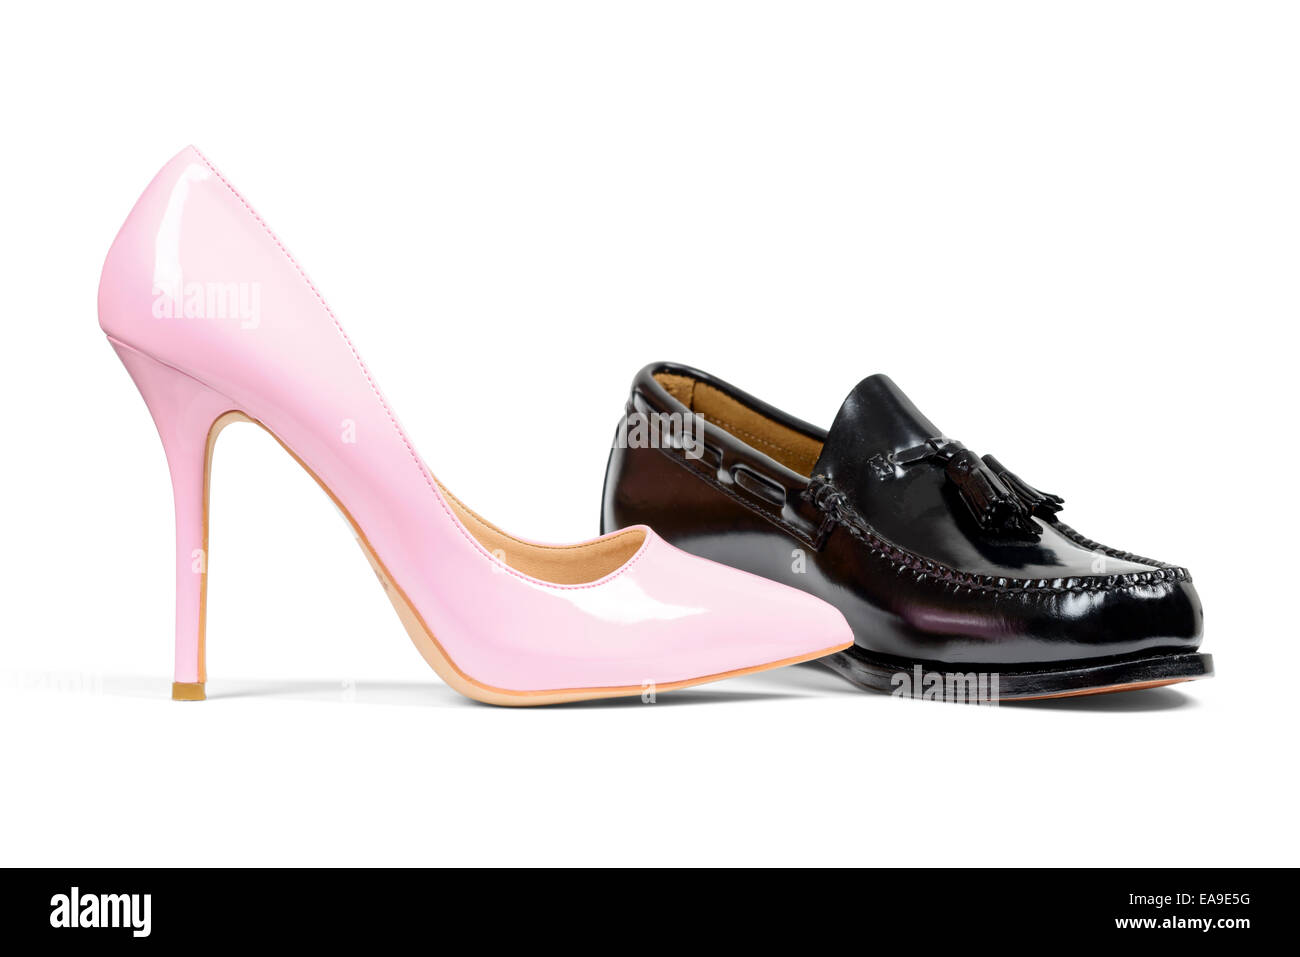 La chaussure de luxe homme et femme chaussure talon rose isolated over white with clipping path. Banque D'Images